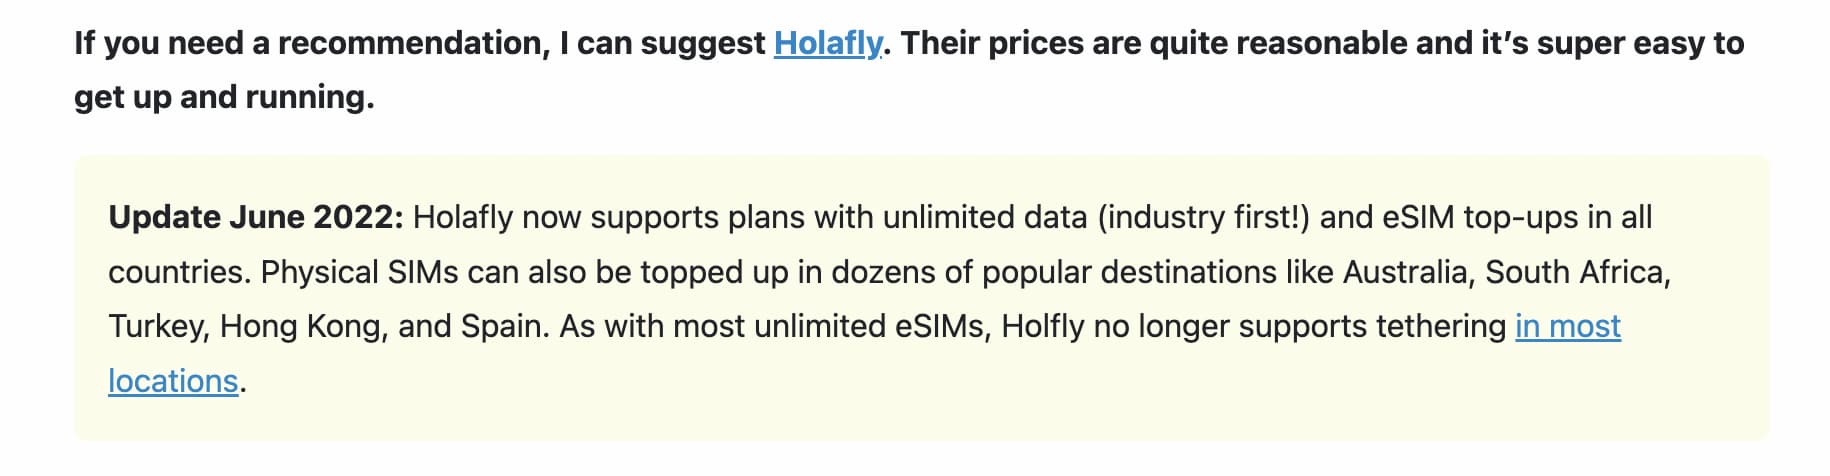 Holafly eSIM's 'Unlimited' Data Claims: What Customer Reviews Have to Say